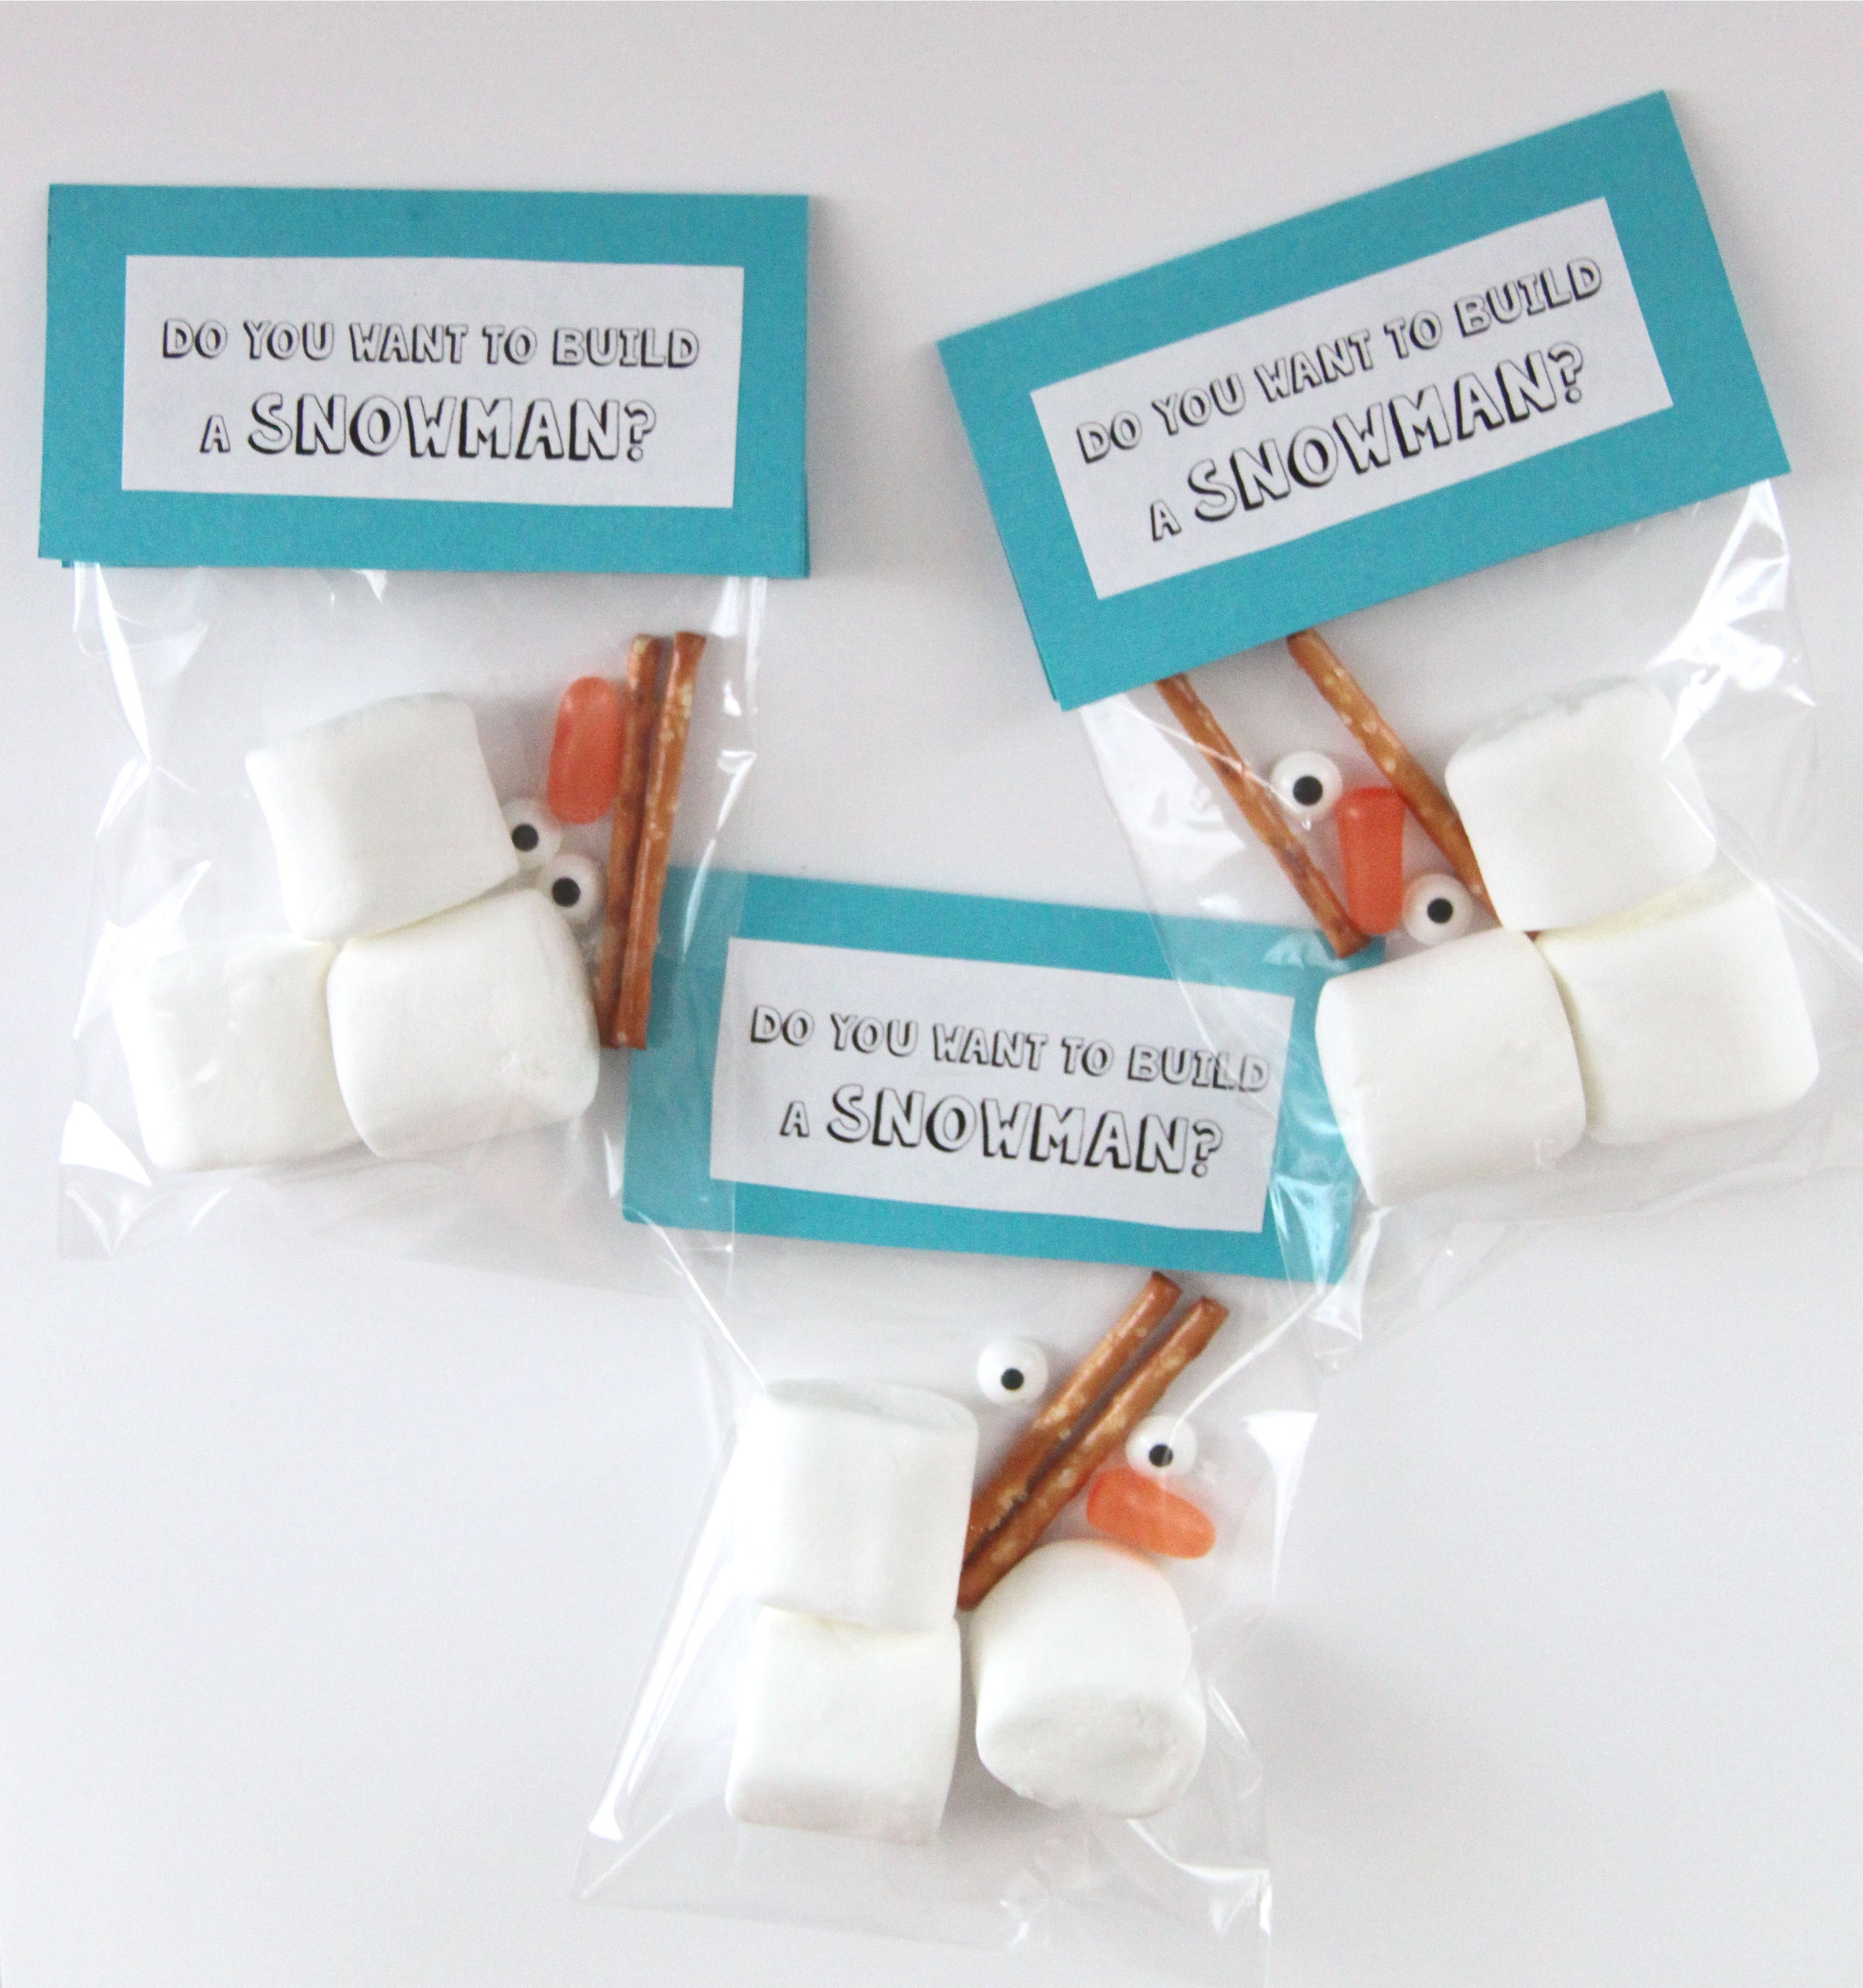 Snowman craft Archives - Smashed Peas & Carrots